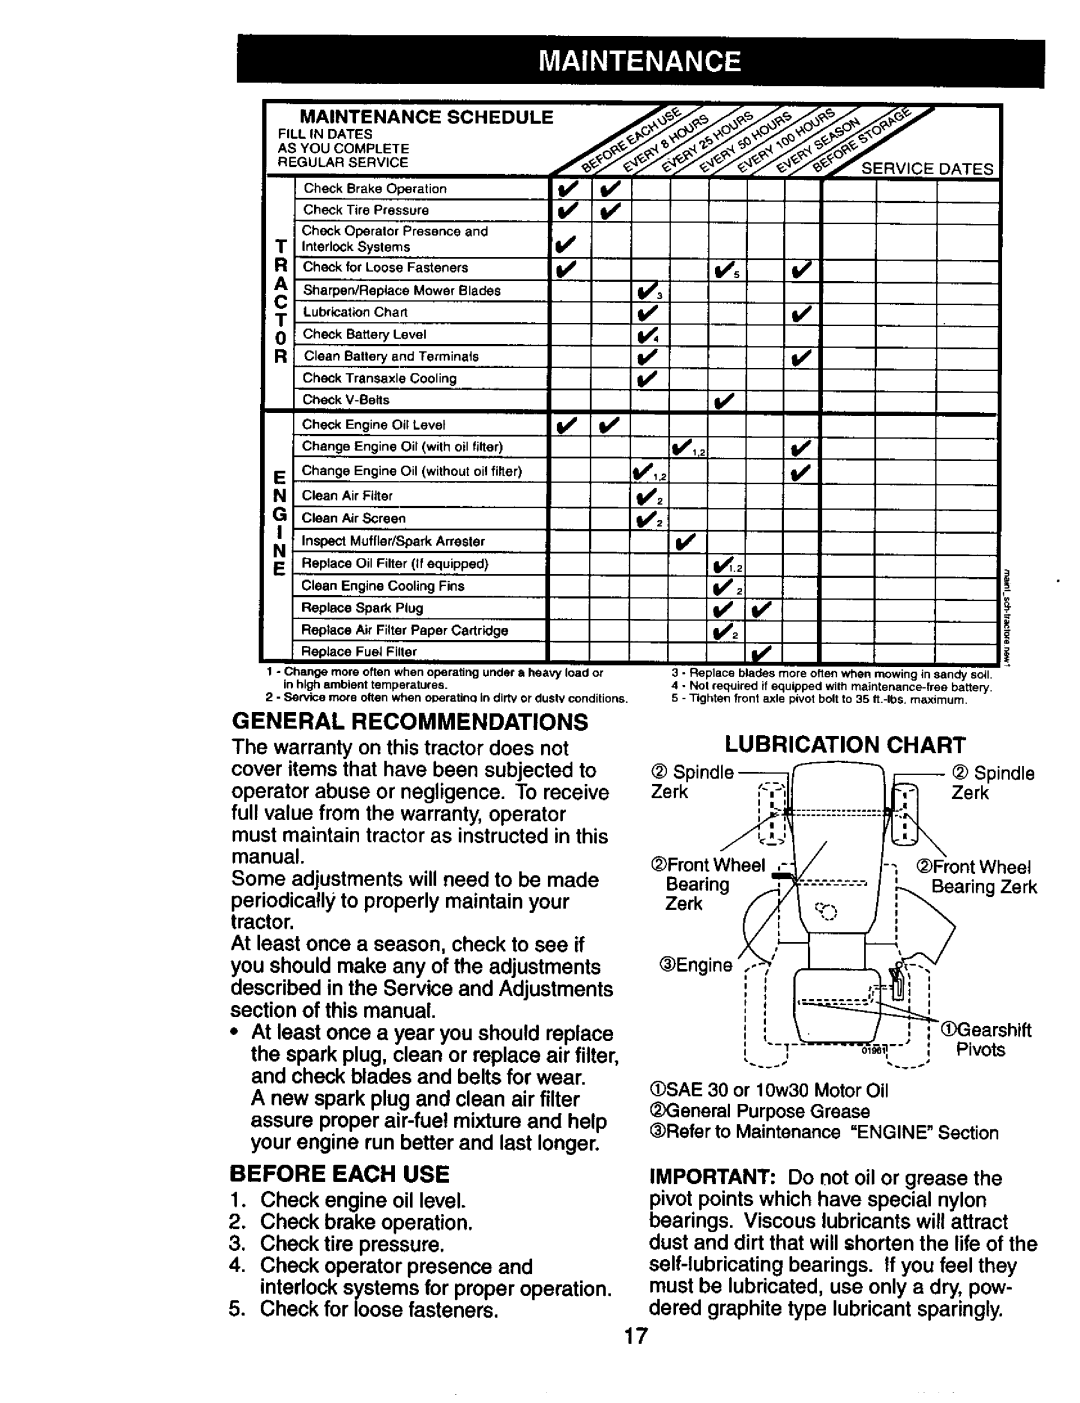 Craftsman 917.274031 owner manual Lubrication Chart, General Recommendations, Before Each USE, Zerk, 3earshift 